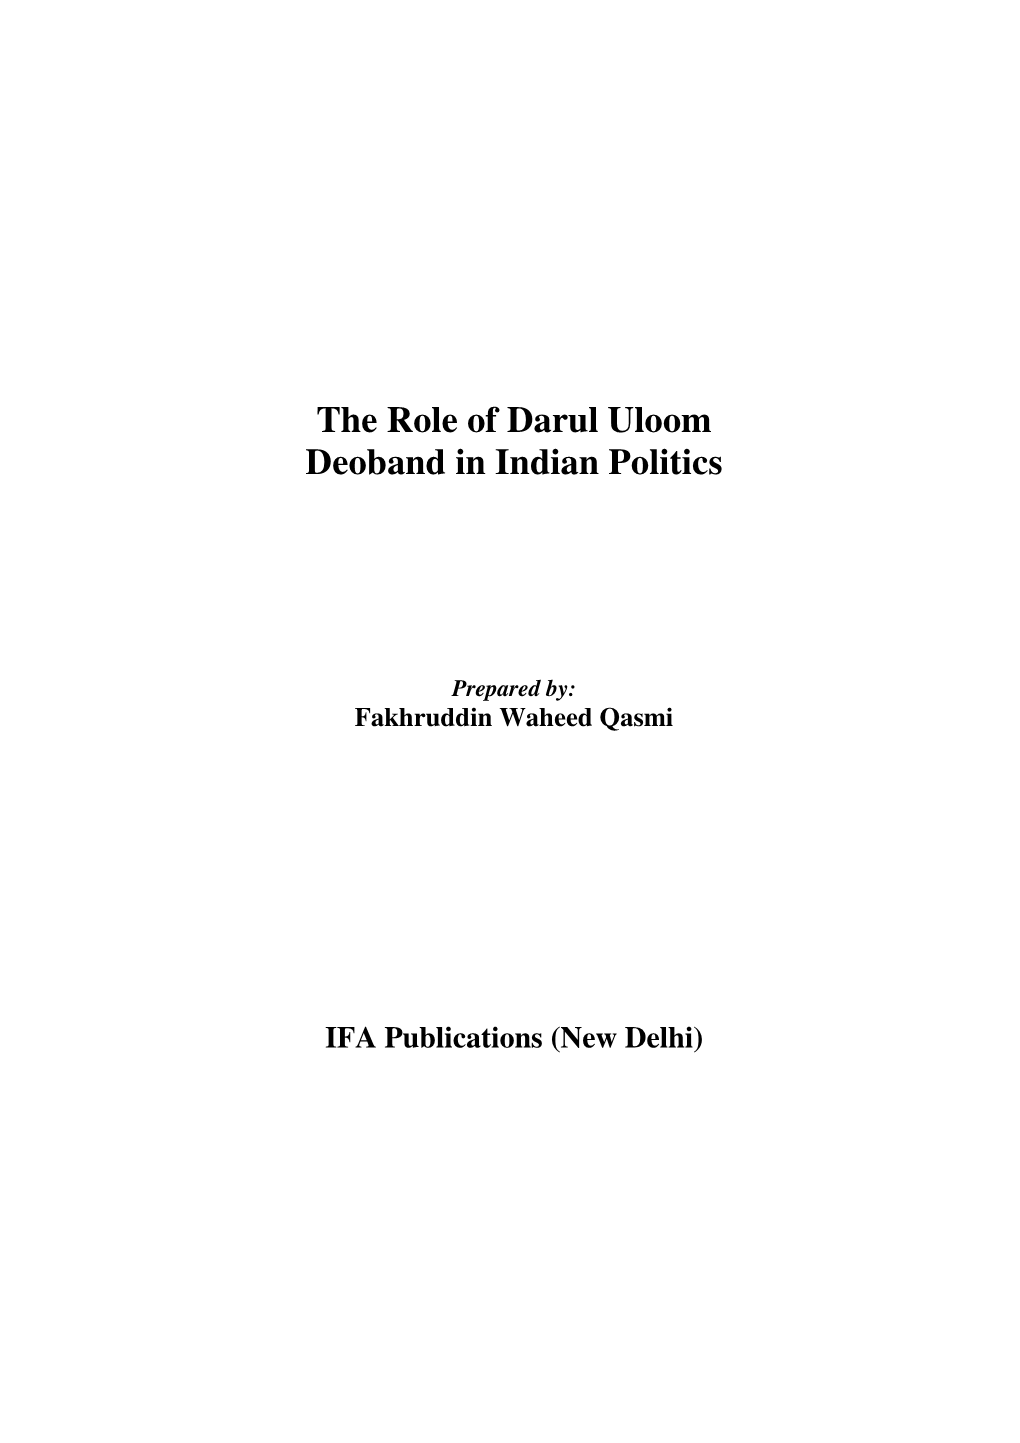 The Role of Darul Uloom Deoband in Indian Politics